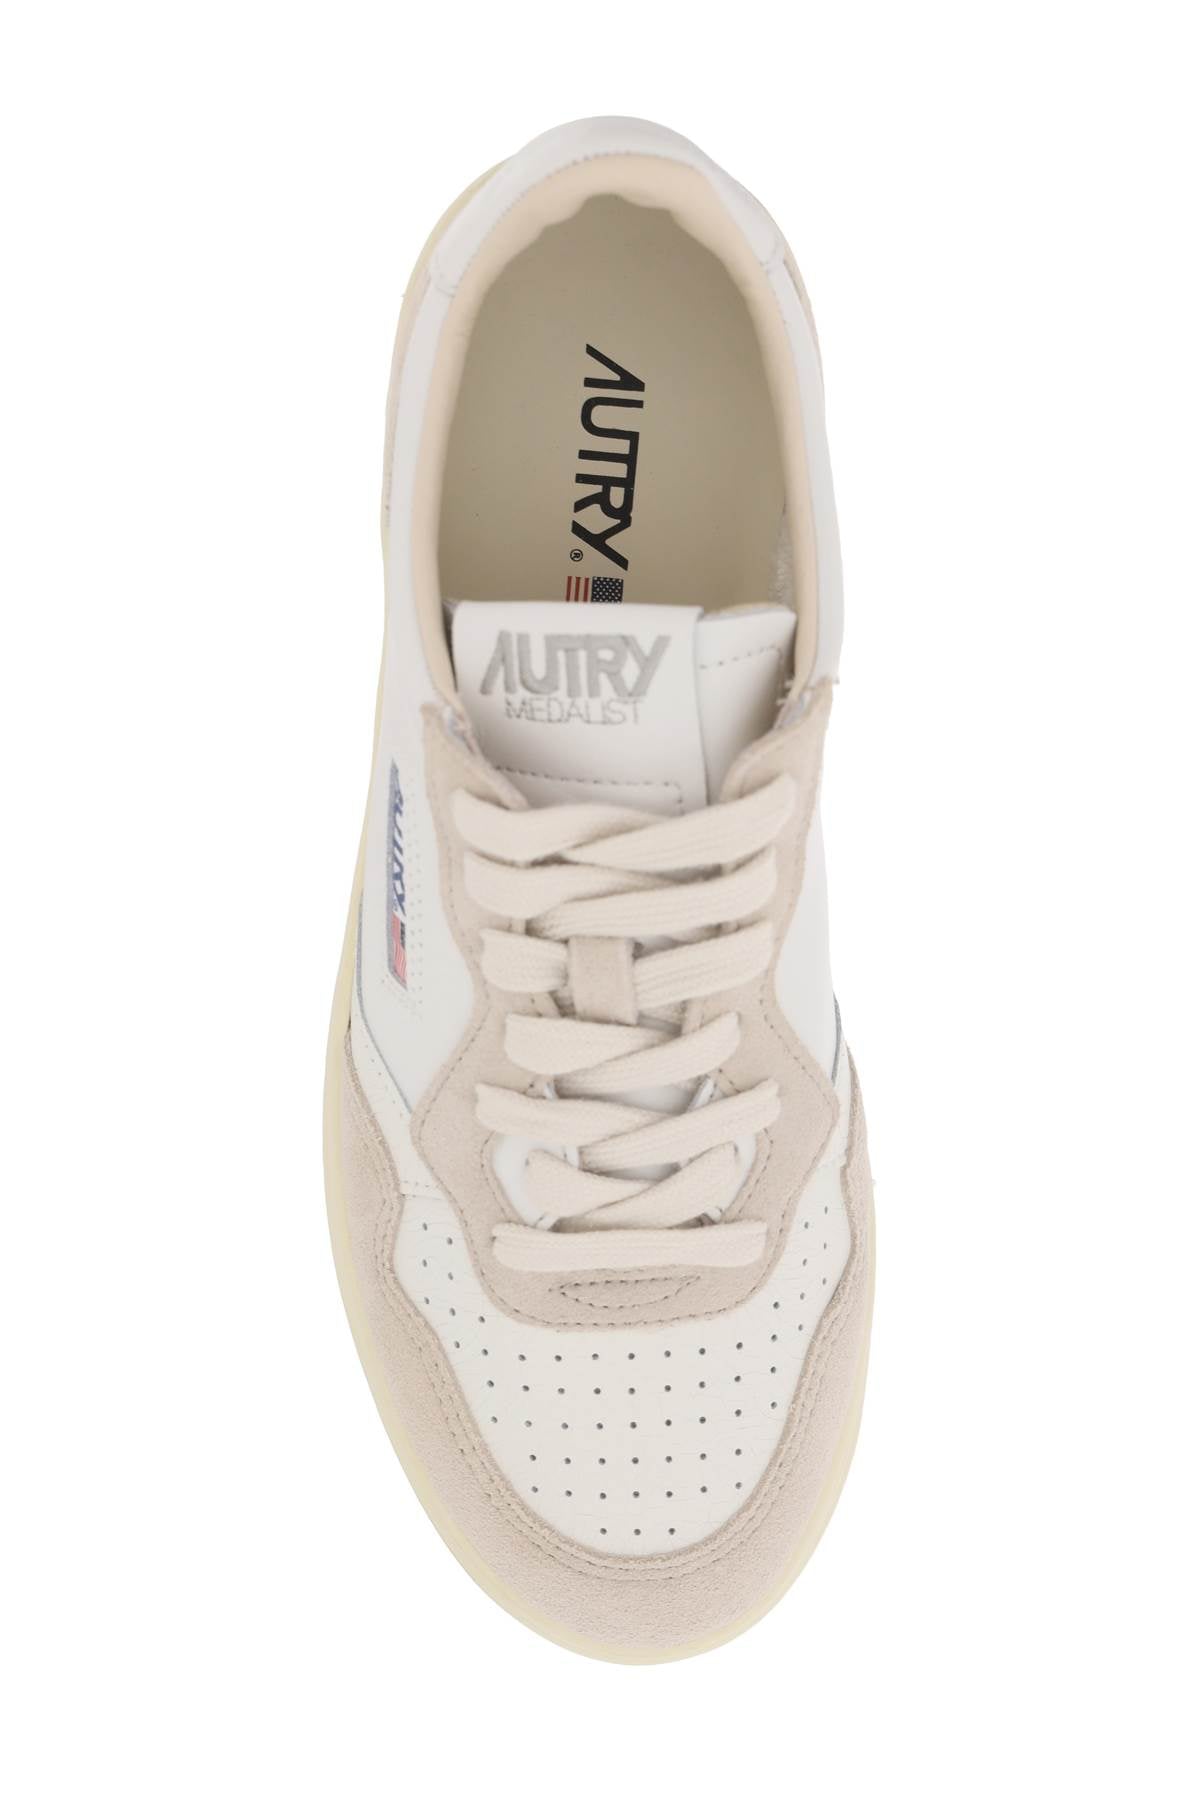 Autry leather medalist low sneakers-1